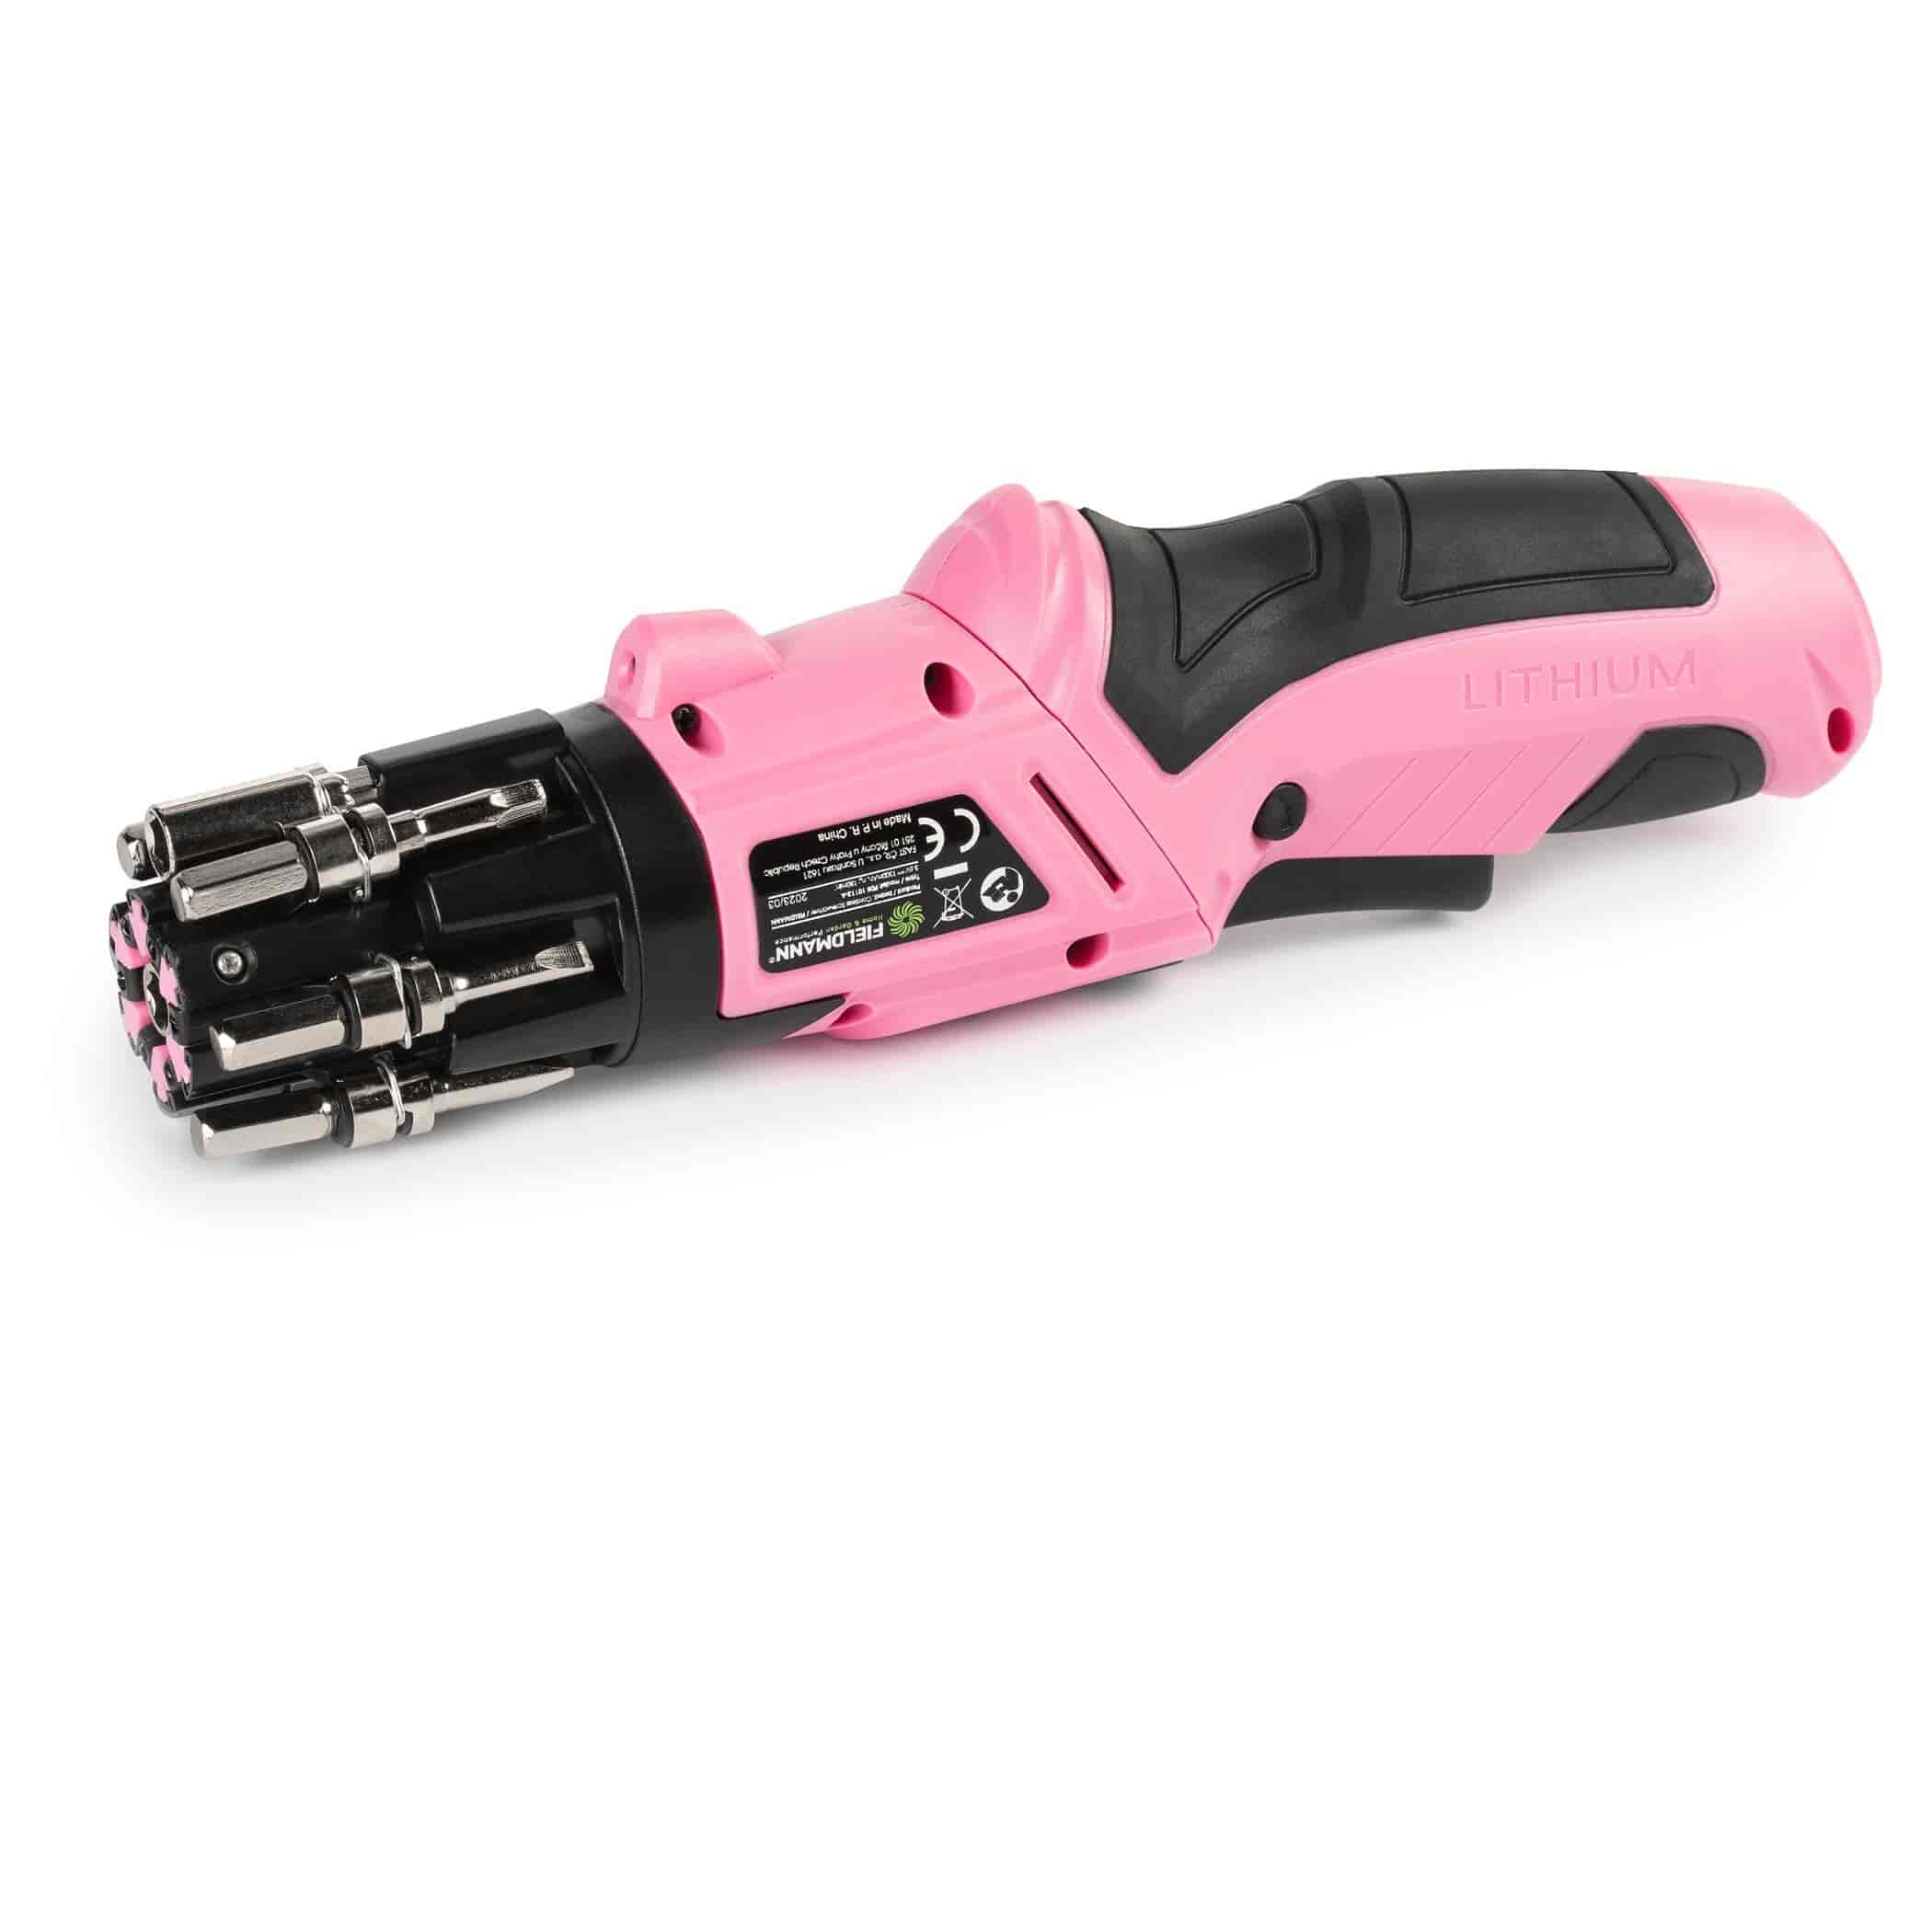 Cordless screwdriver Pink 3.6VExperience the ultimate power and convenience with the FIELDMANN FDS 10112-A Cordless Screwdriver – your reliable partner in any DIY task! In a fresh and eye-catching pink color, this cordless screwdriver is not just a power tool, it's also a statement piece for your toolbox. Whether it's furniture assembly, repairs, or other DIY tasks, this screwdriver is your dependable companion.Fieldmann